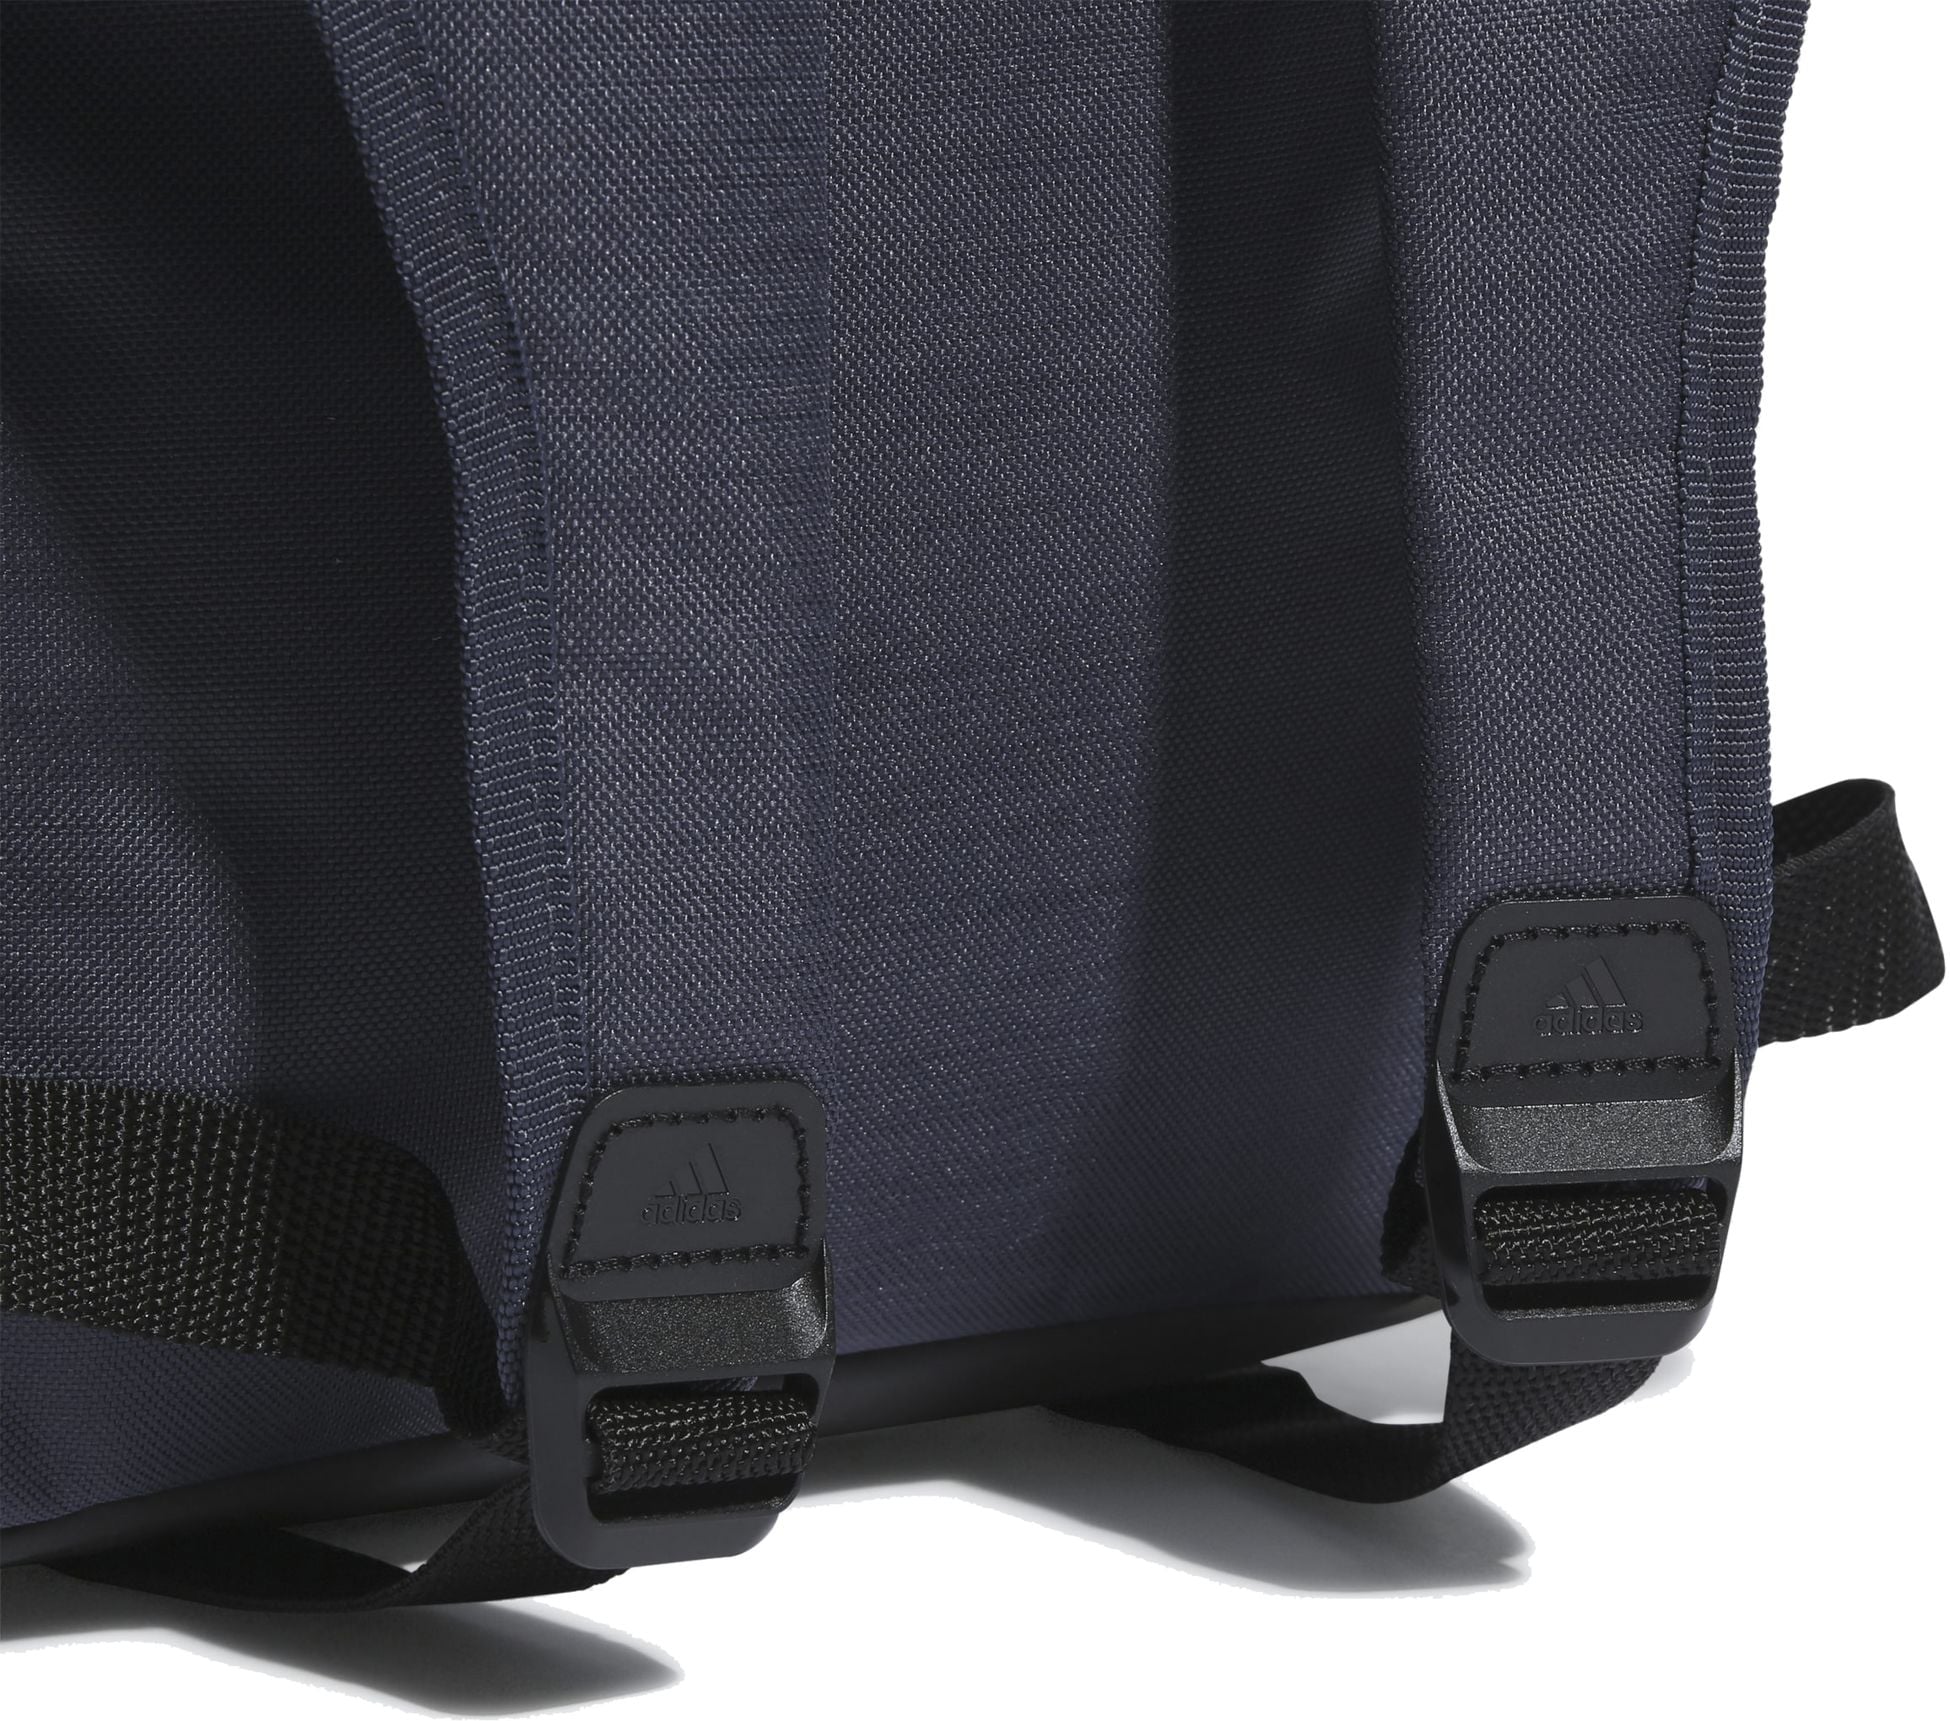 ADIDAS, LINEAR BACKPACK